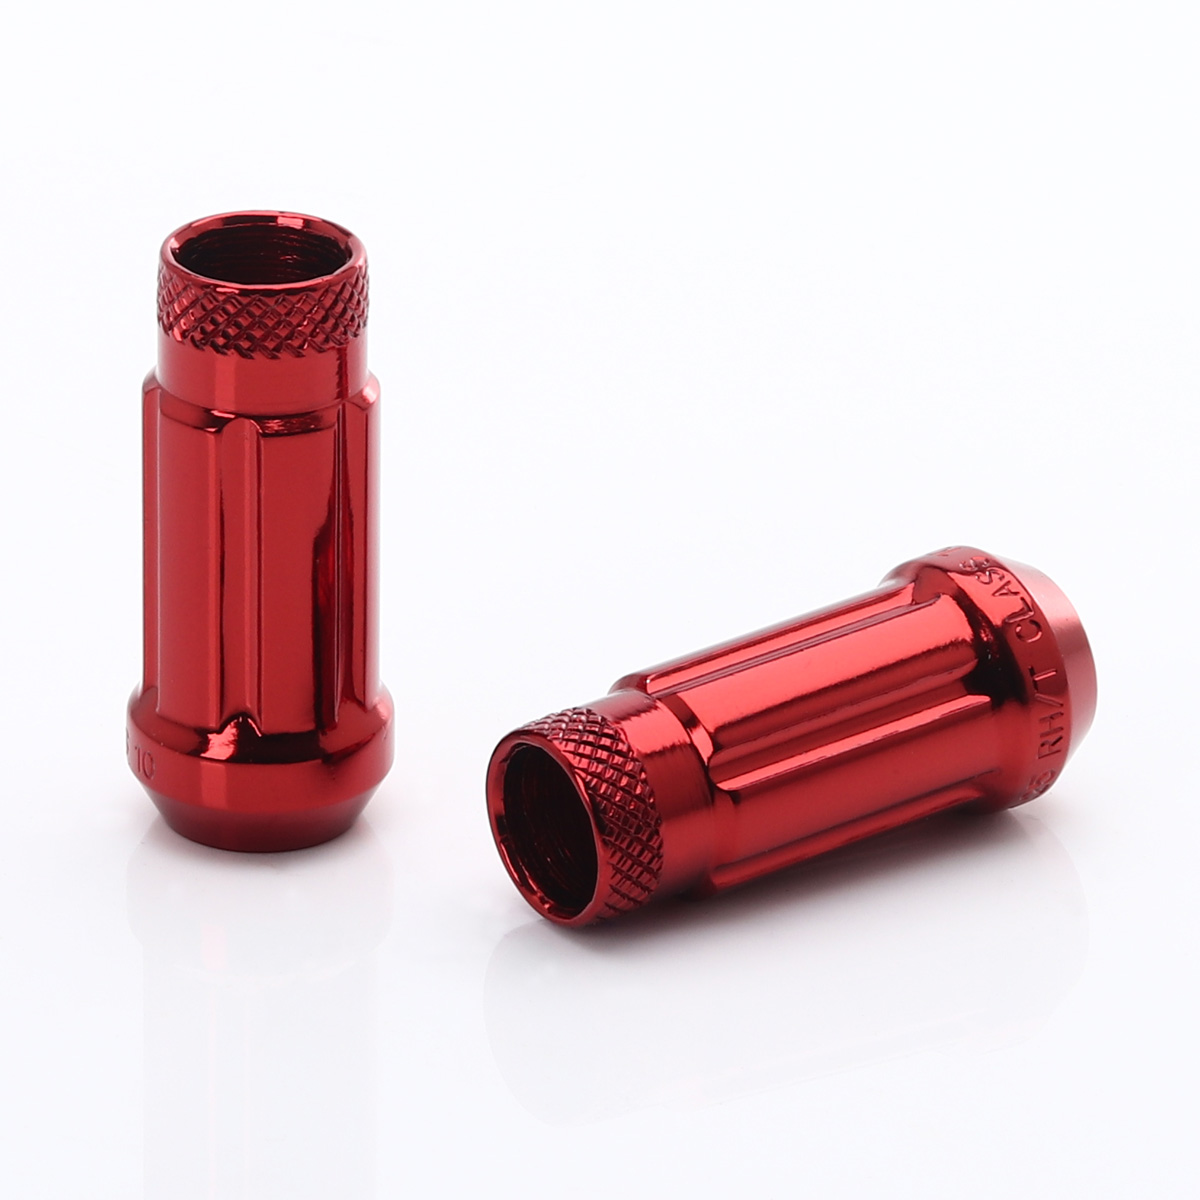 Forged Steel Japan Racing Nuts JN4 12x1,25 Red